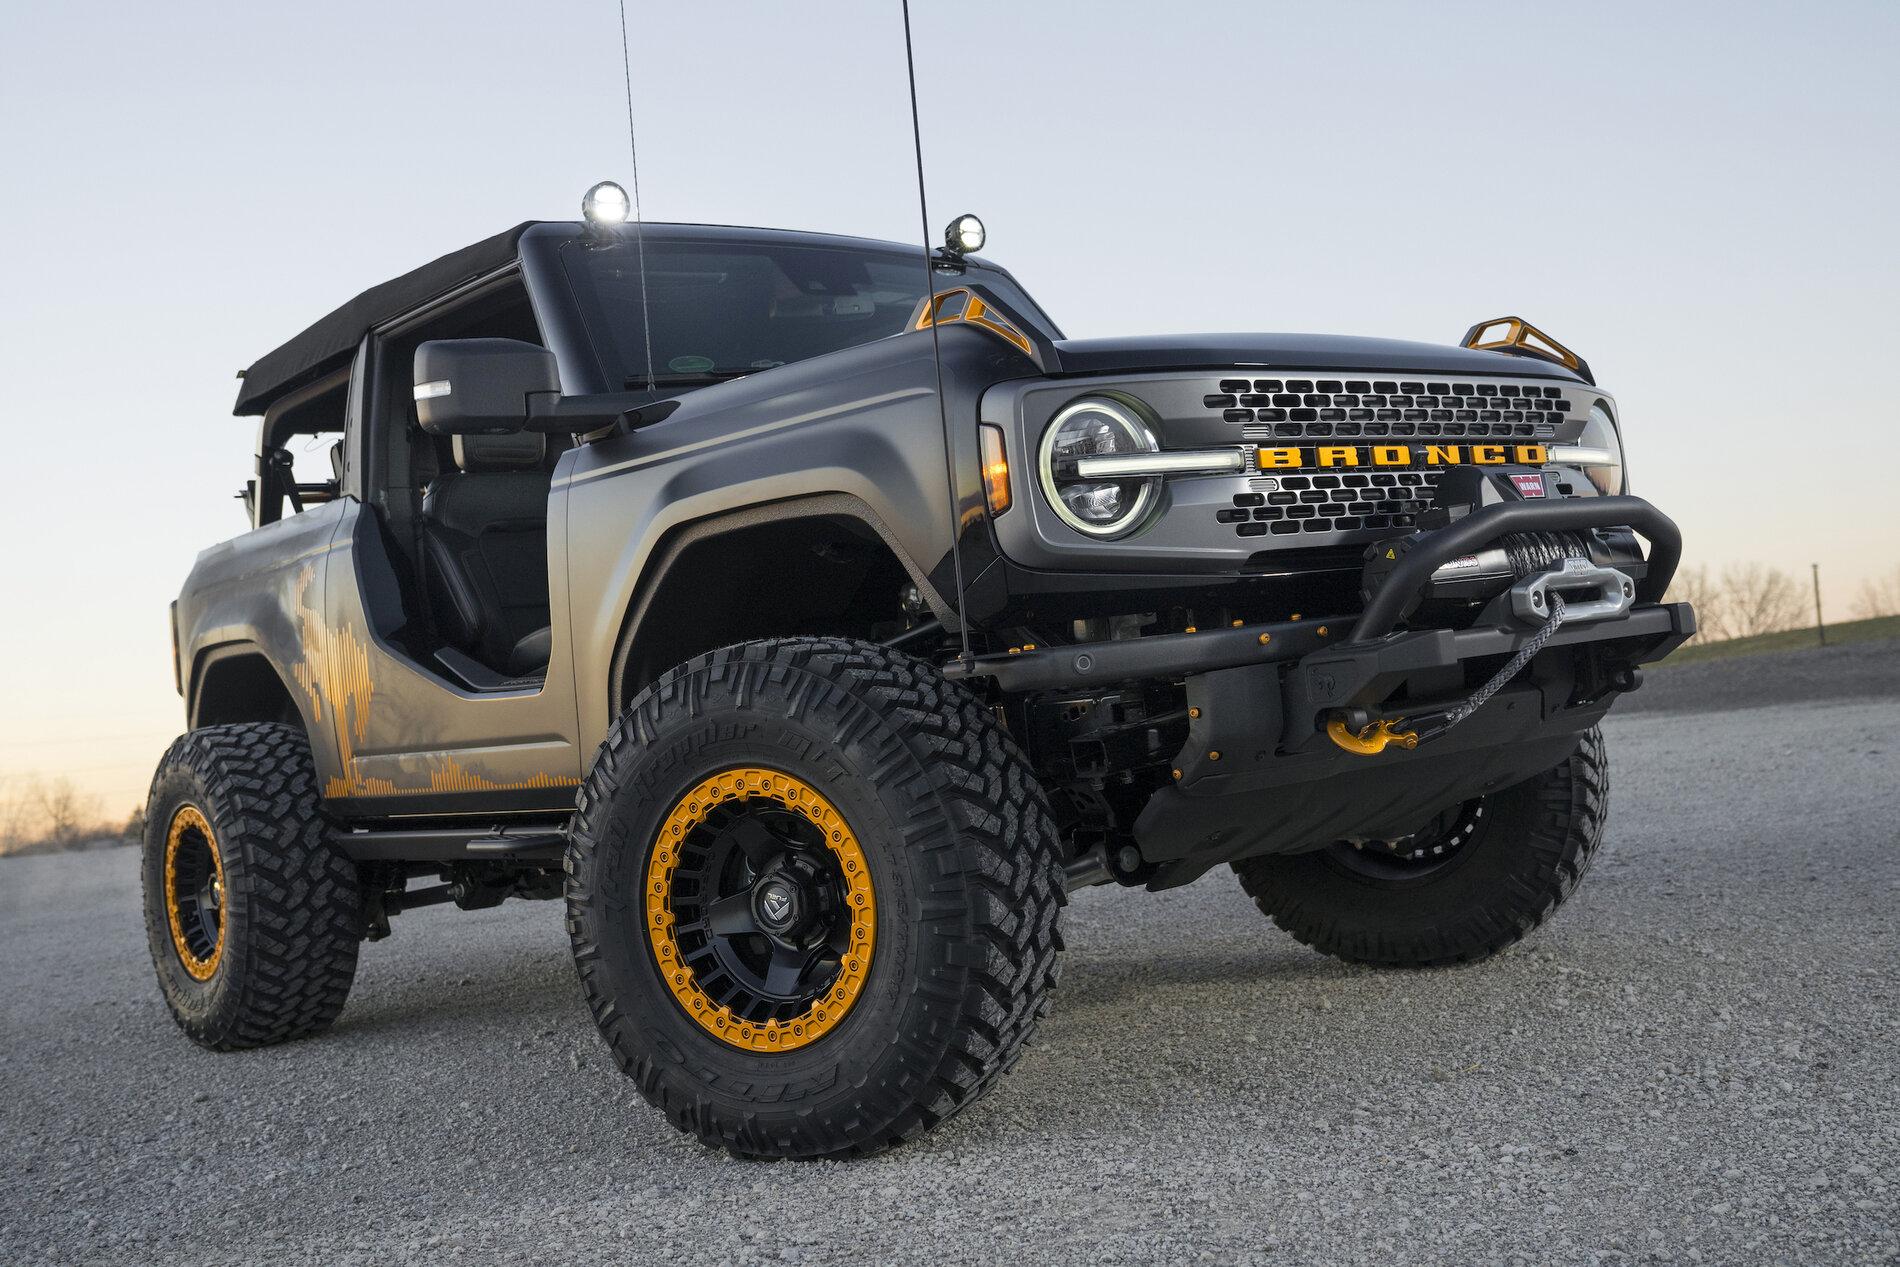 Ford Bronco Official Wallpapers and Video: Bronco Badlands Sasquatch 2-Door SEMA Concept Ford Bronco Badlands Sasquatch 2-Door Concept_11.JPG